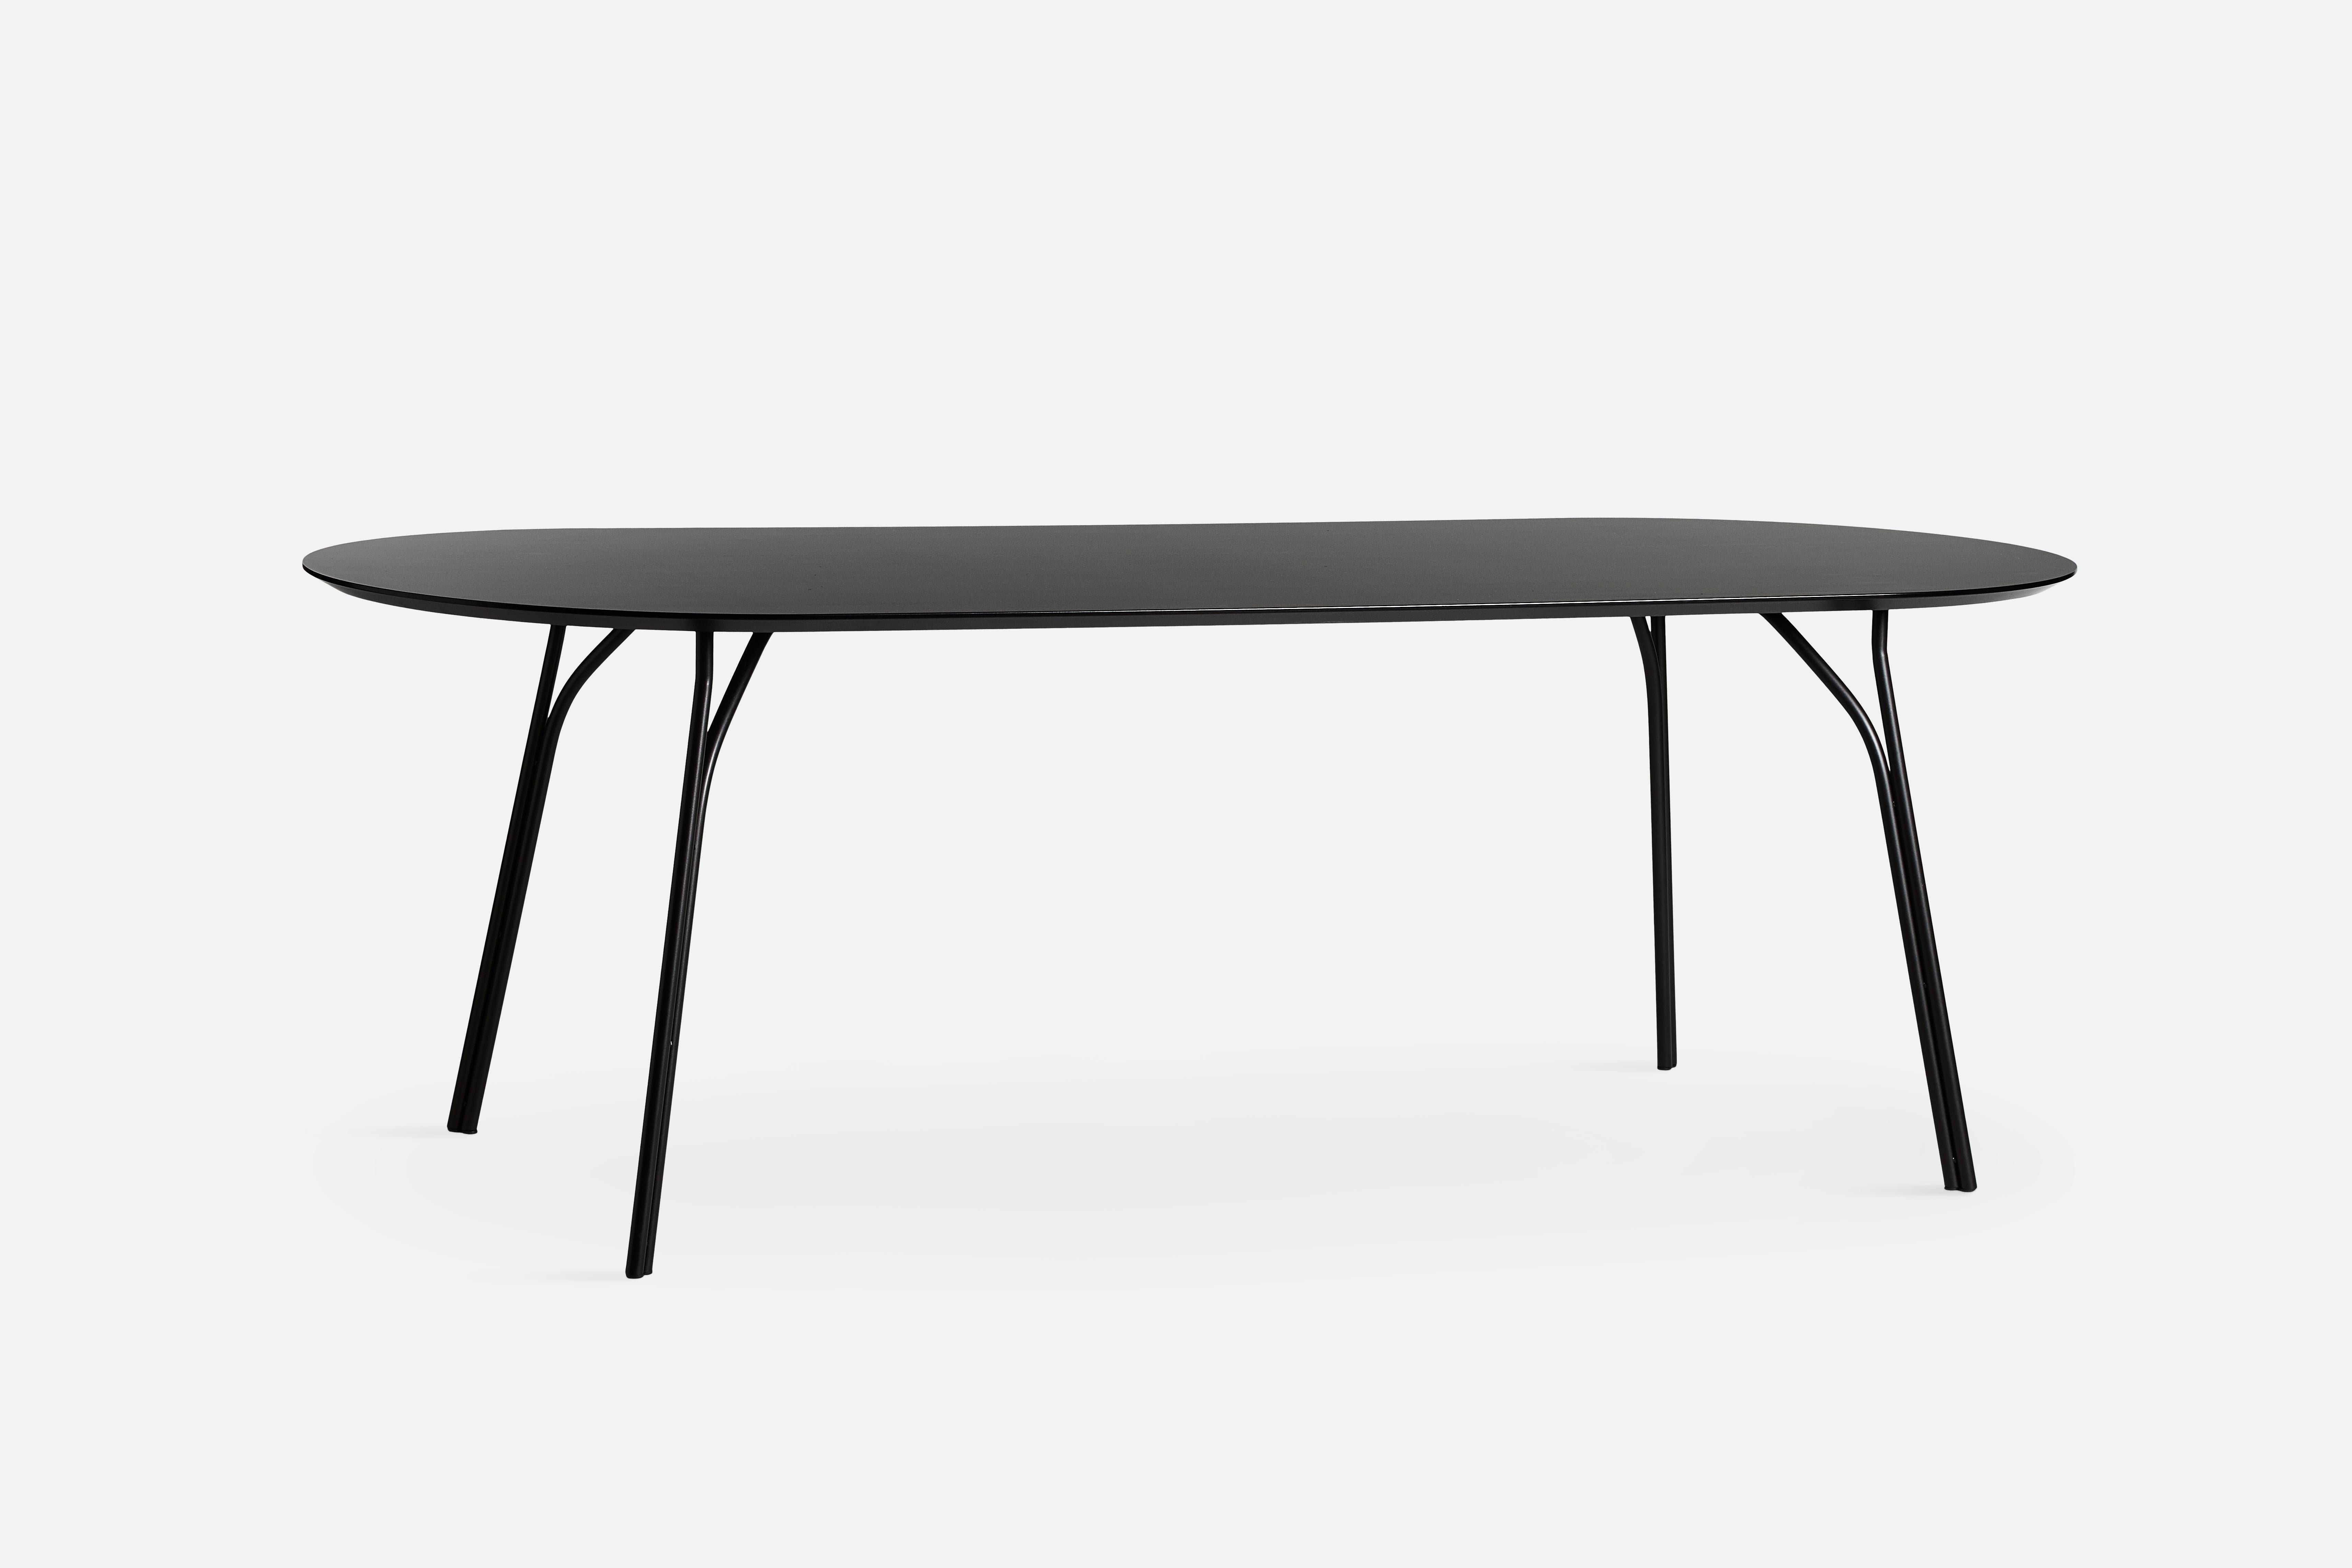 Tree black large dining table by Elisabeth Hertzfeld
Materials: Fenix Laminate, metal 
Dimensions: D 90 x W 220 x H 74 cm
Also available in different colors and sizes

The founders, Mia and Torben Koed, decided to put their 30 years of